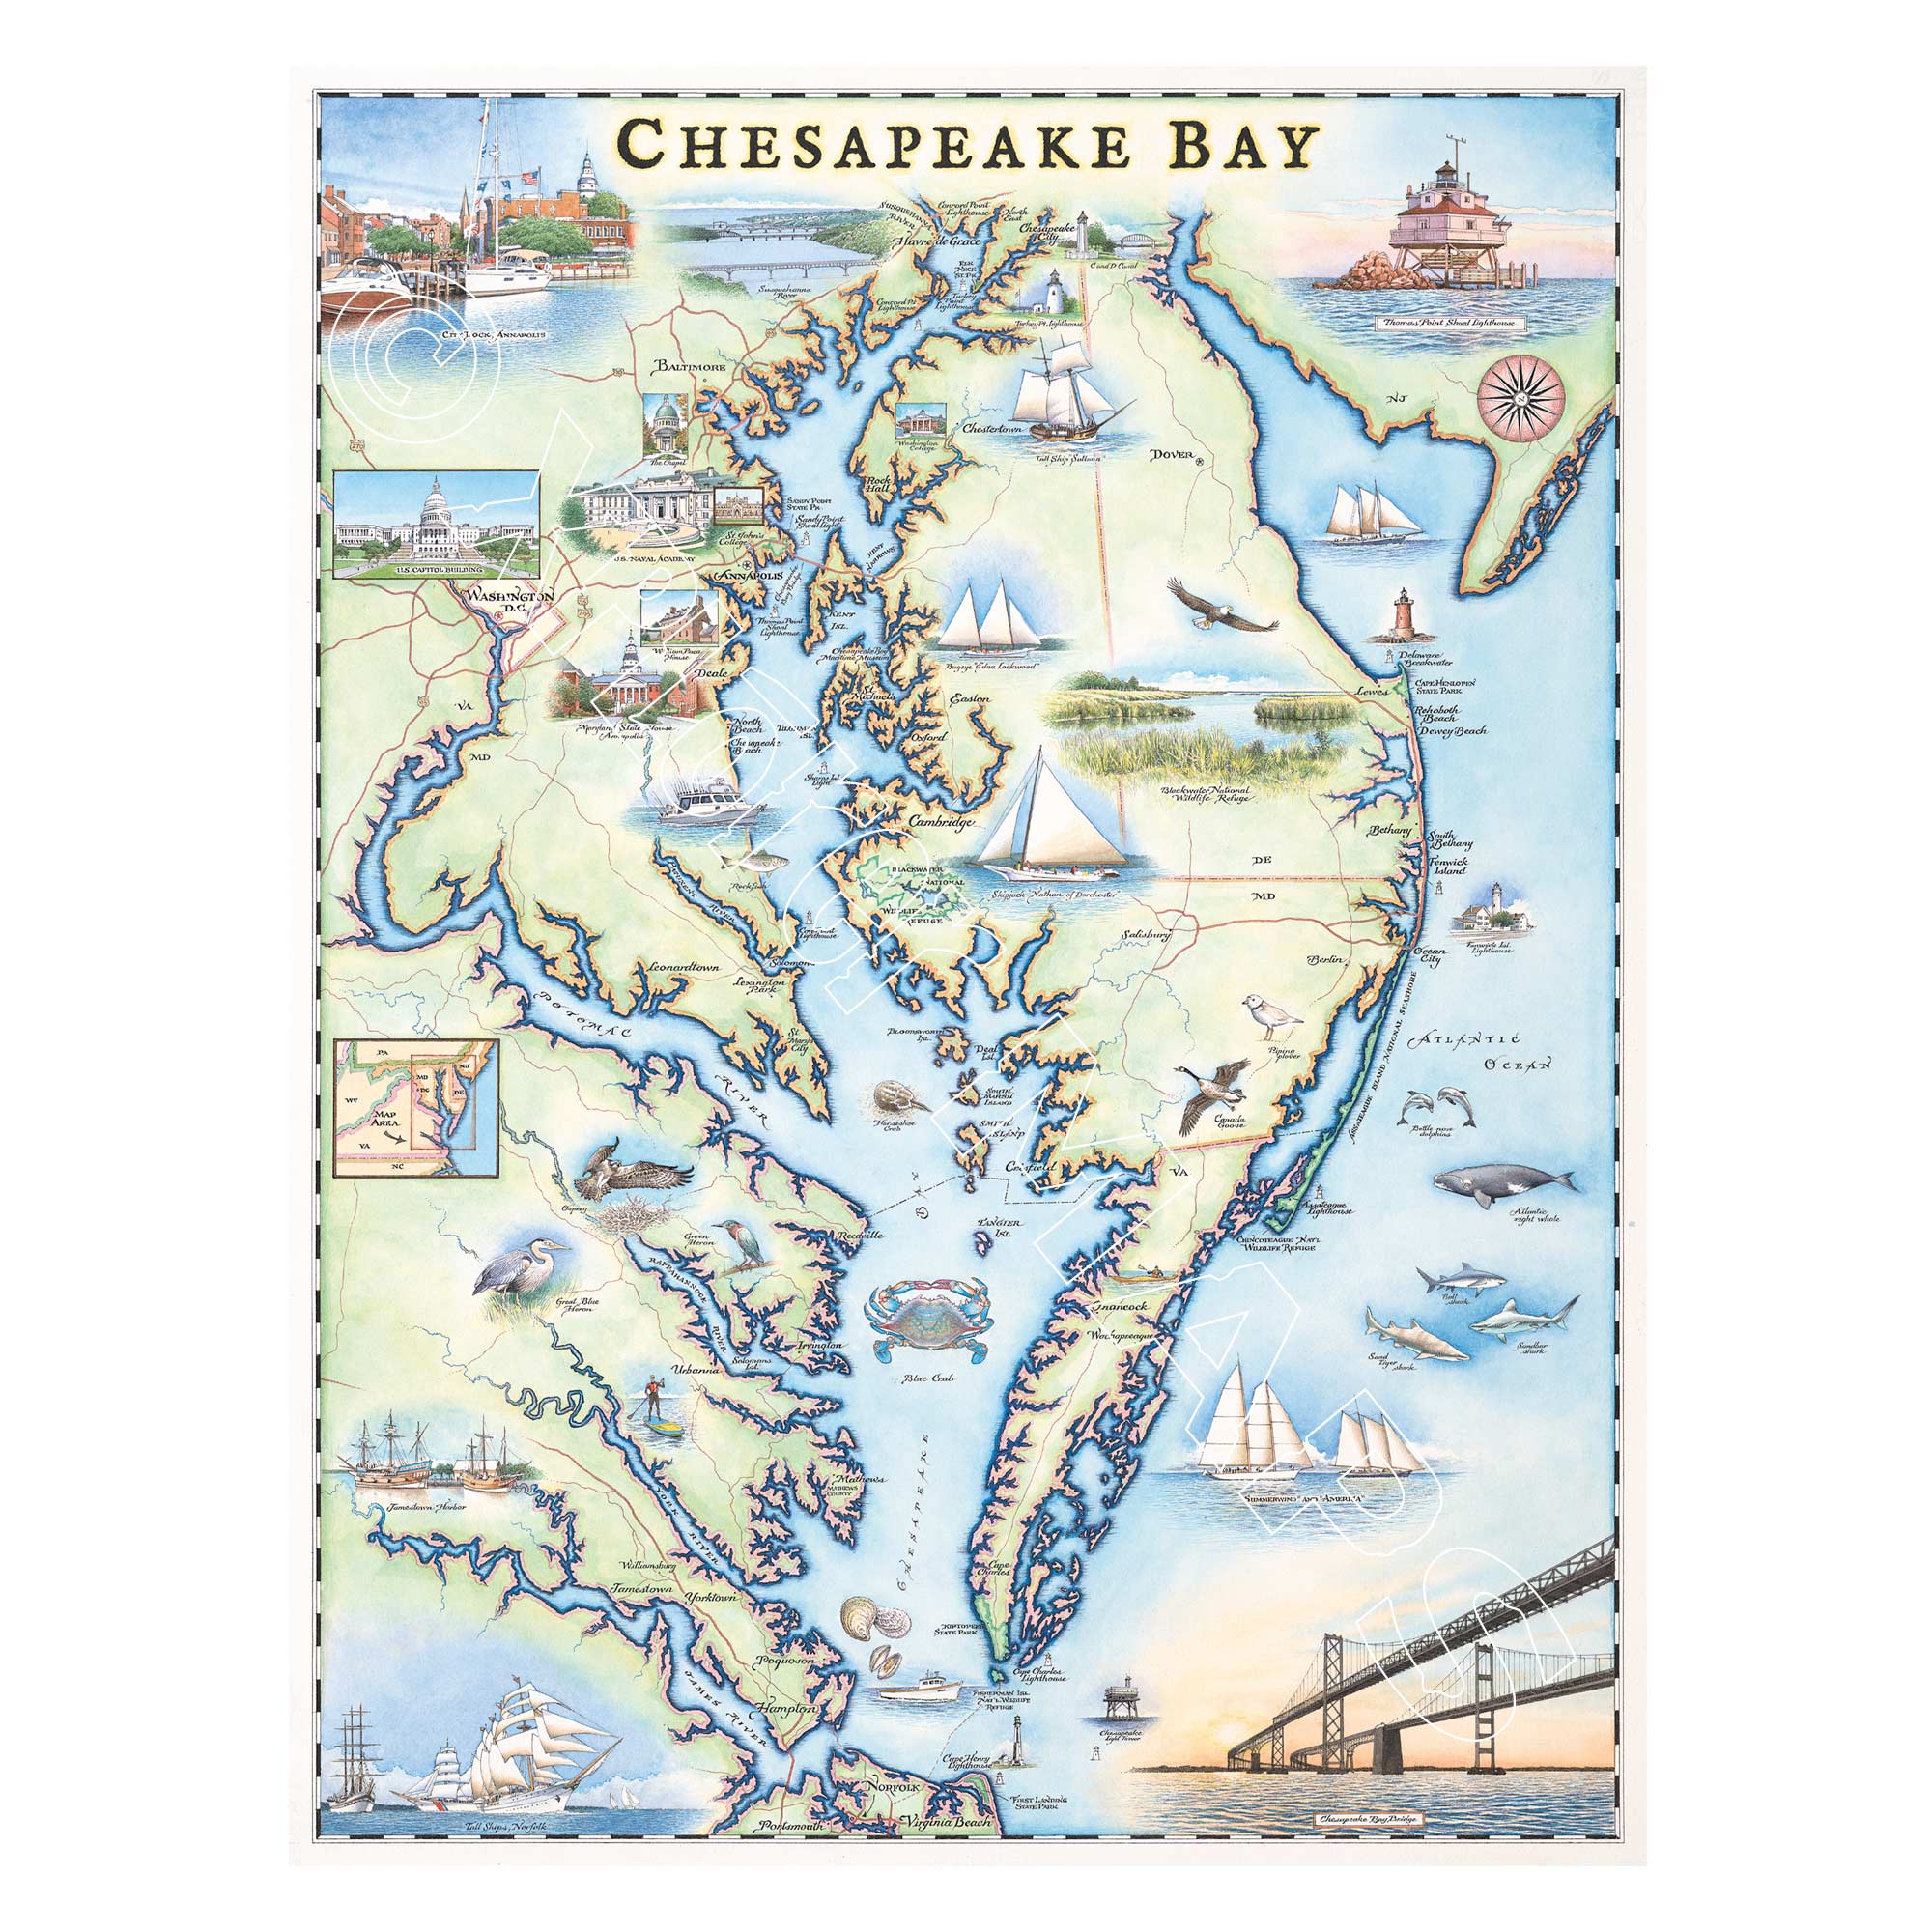 This is a hand-drawn map of Chesapeake Bay featuring blue and green earth tones and illustrations of boat craft and marine life. The cities showcased on the map are the major cities situated along the shoreline of the bay as well along the peninsula including: Baltimore, Annapolis, Washington D.C., Hampton, Portsmouth, Virginia Beach, and the Chesapeake Bay Bridge. It measures 18x24.